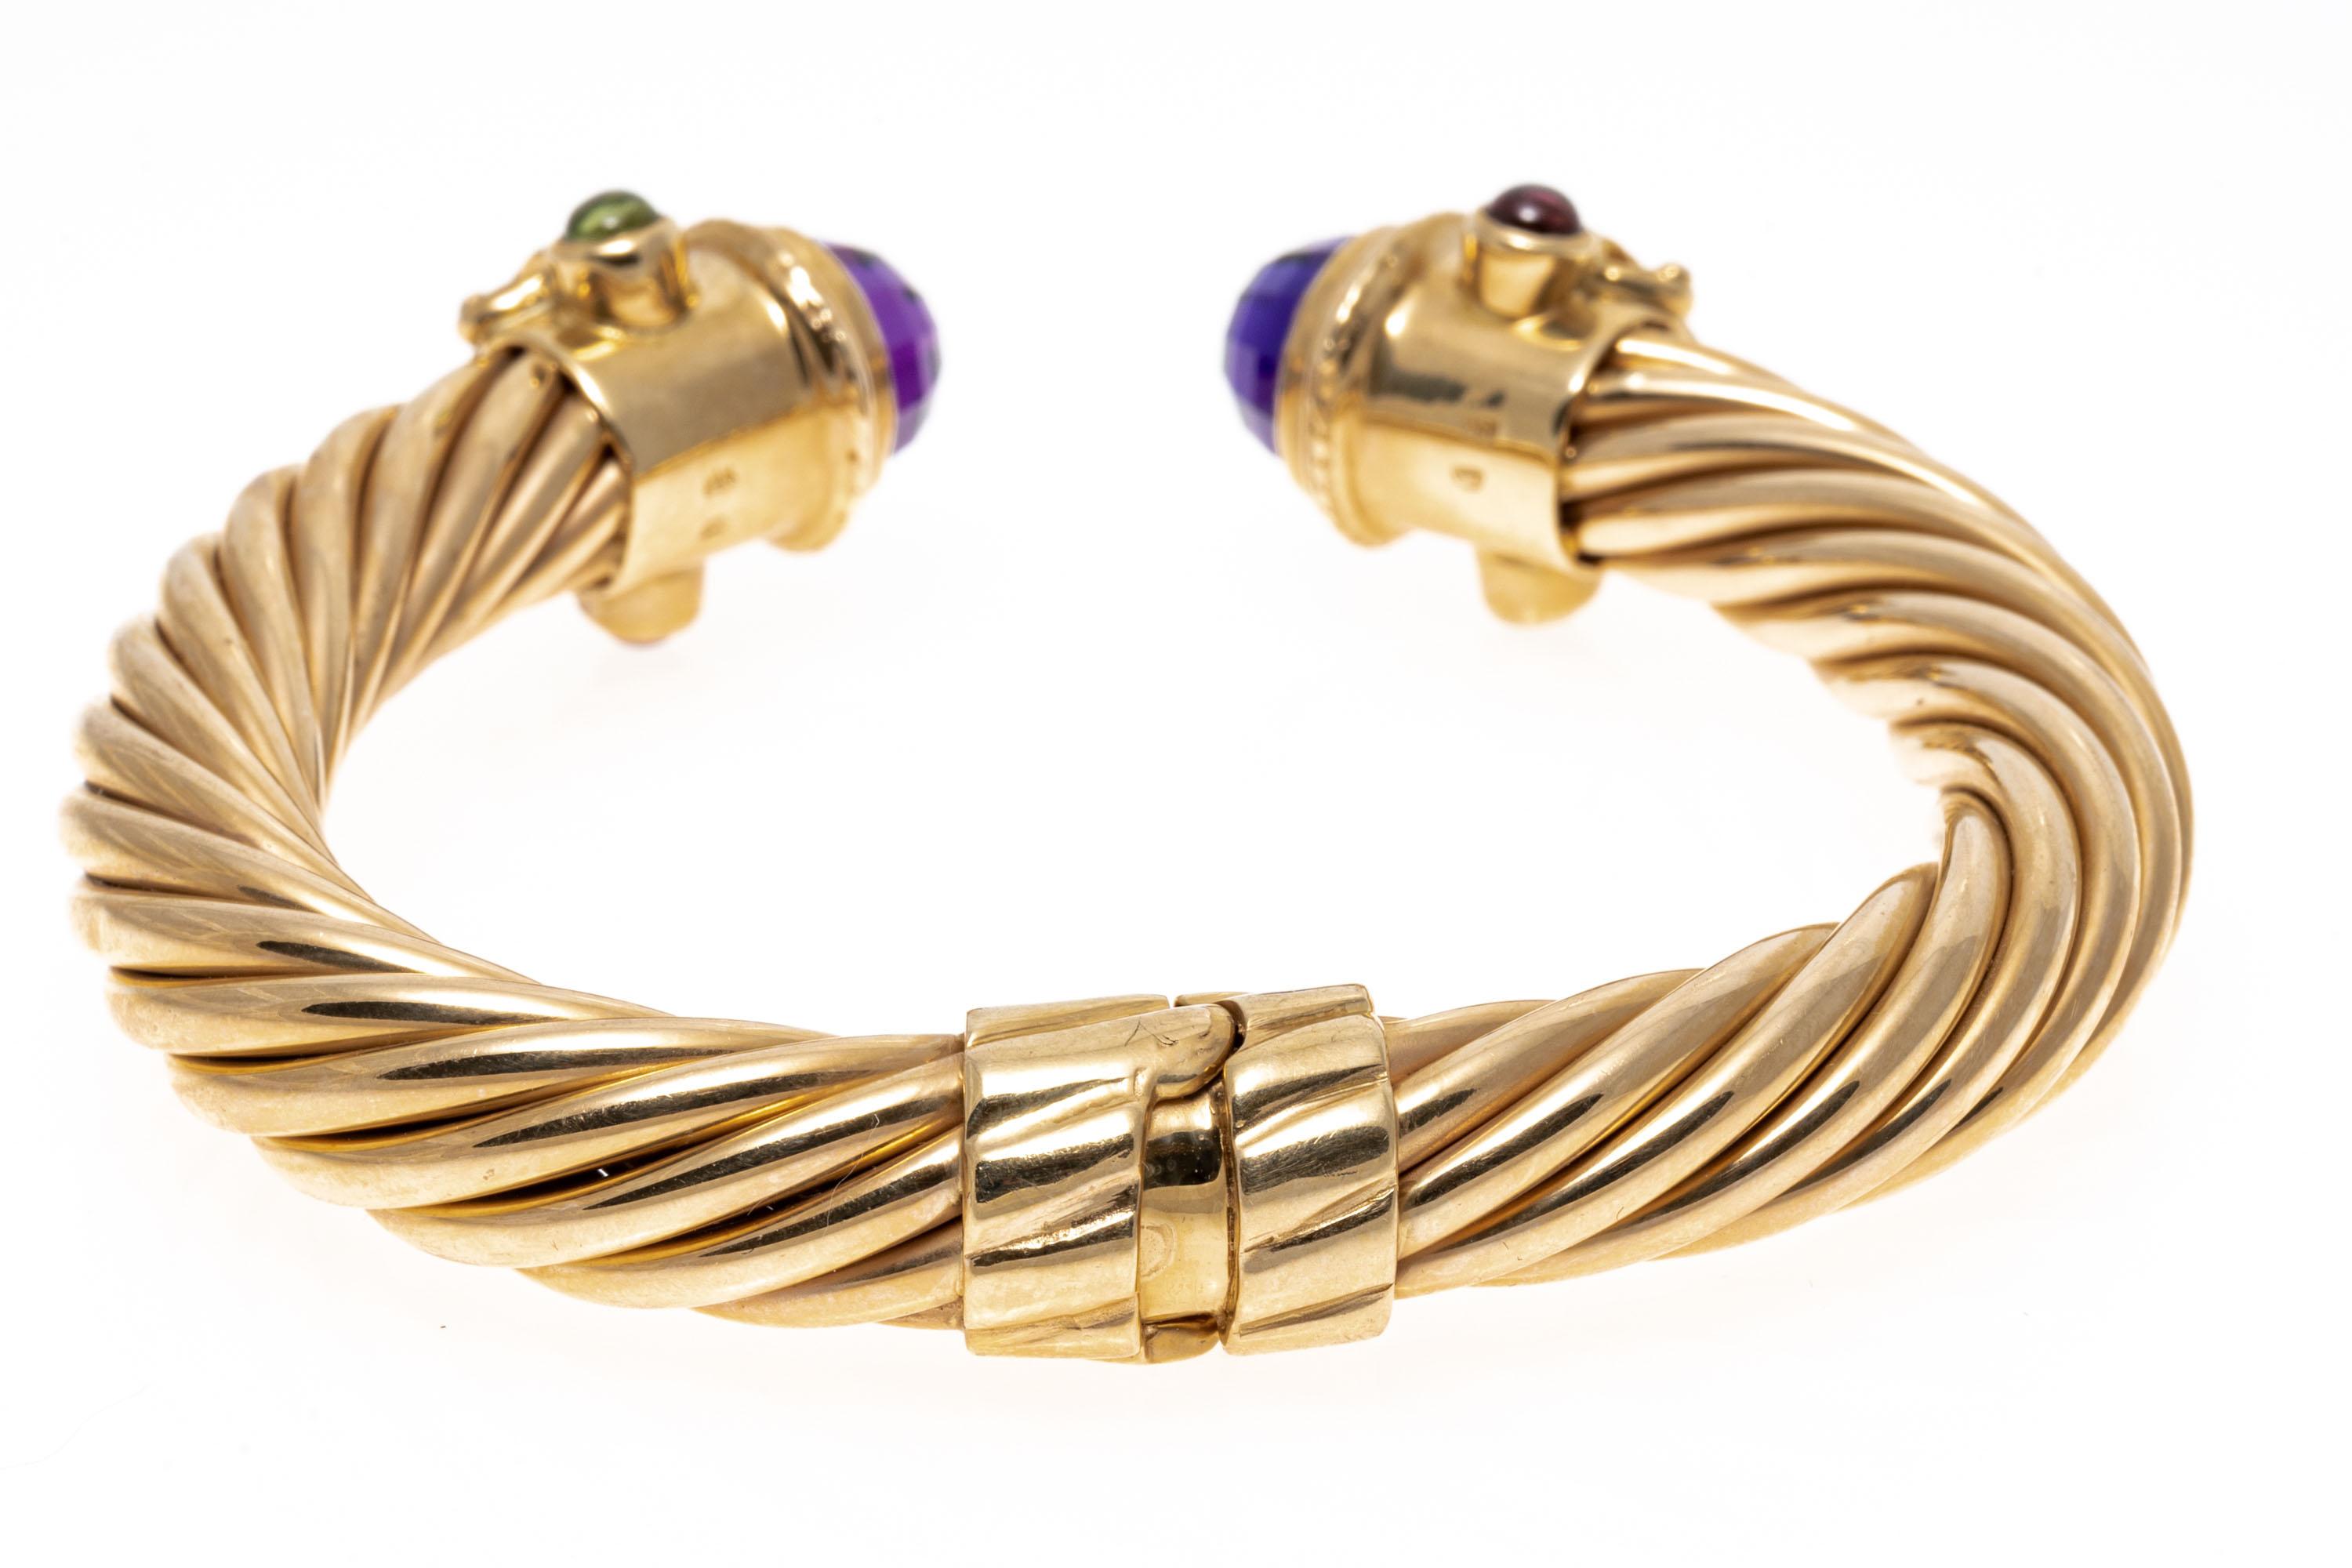 Women's 14k Ribbed Hinged Cuff Bangle Bracelet with Amethysts, Tourmalines and Citrines